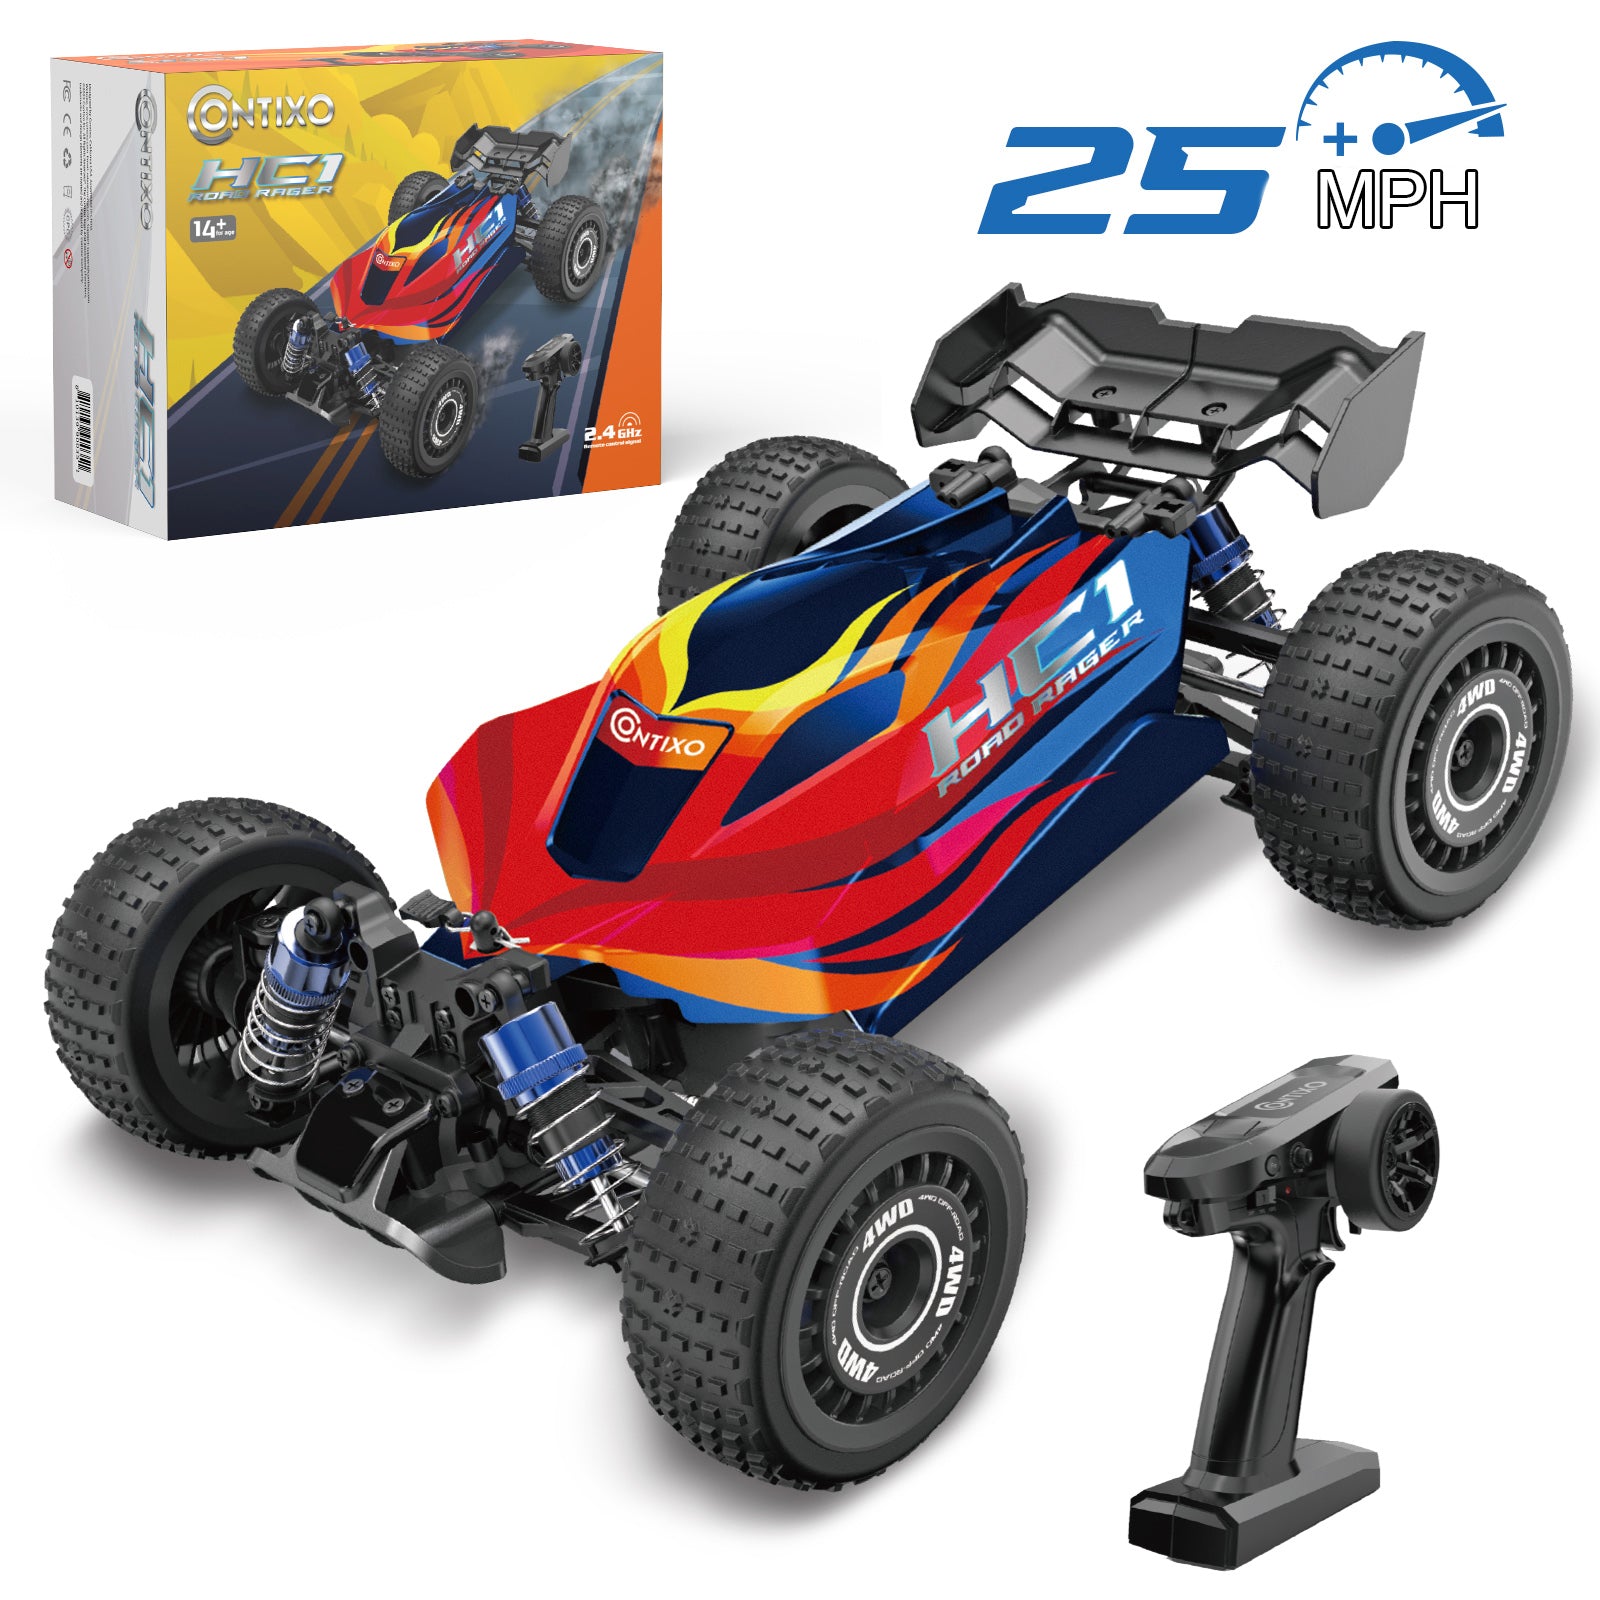 Contixo HC1 Road Rager RC Remote Control High Speed Race Car - 1:16 Scale